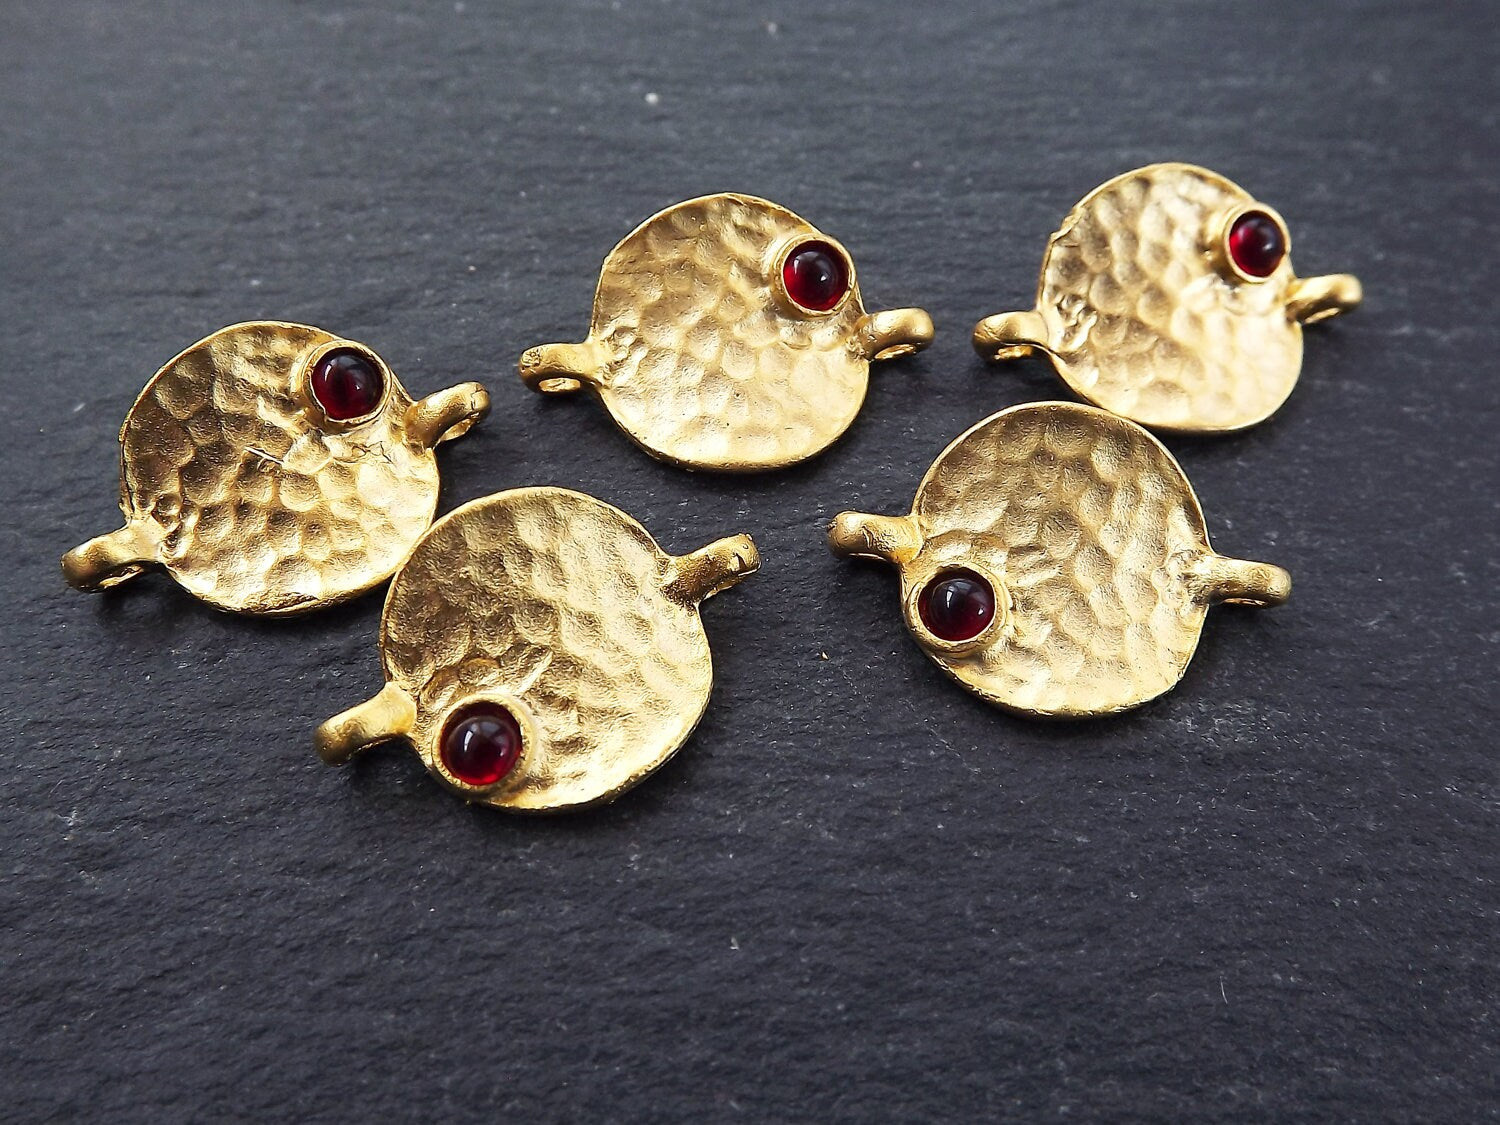 5 Rustic Cast Hammered Warped Disc Charm Connectors with Red Glass Accent - 22k Matte Gold Plated